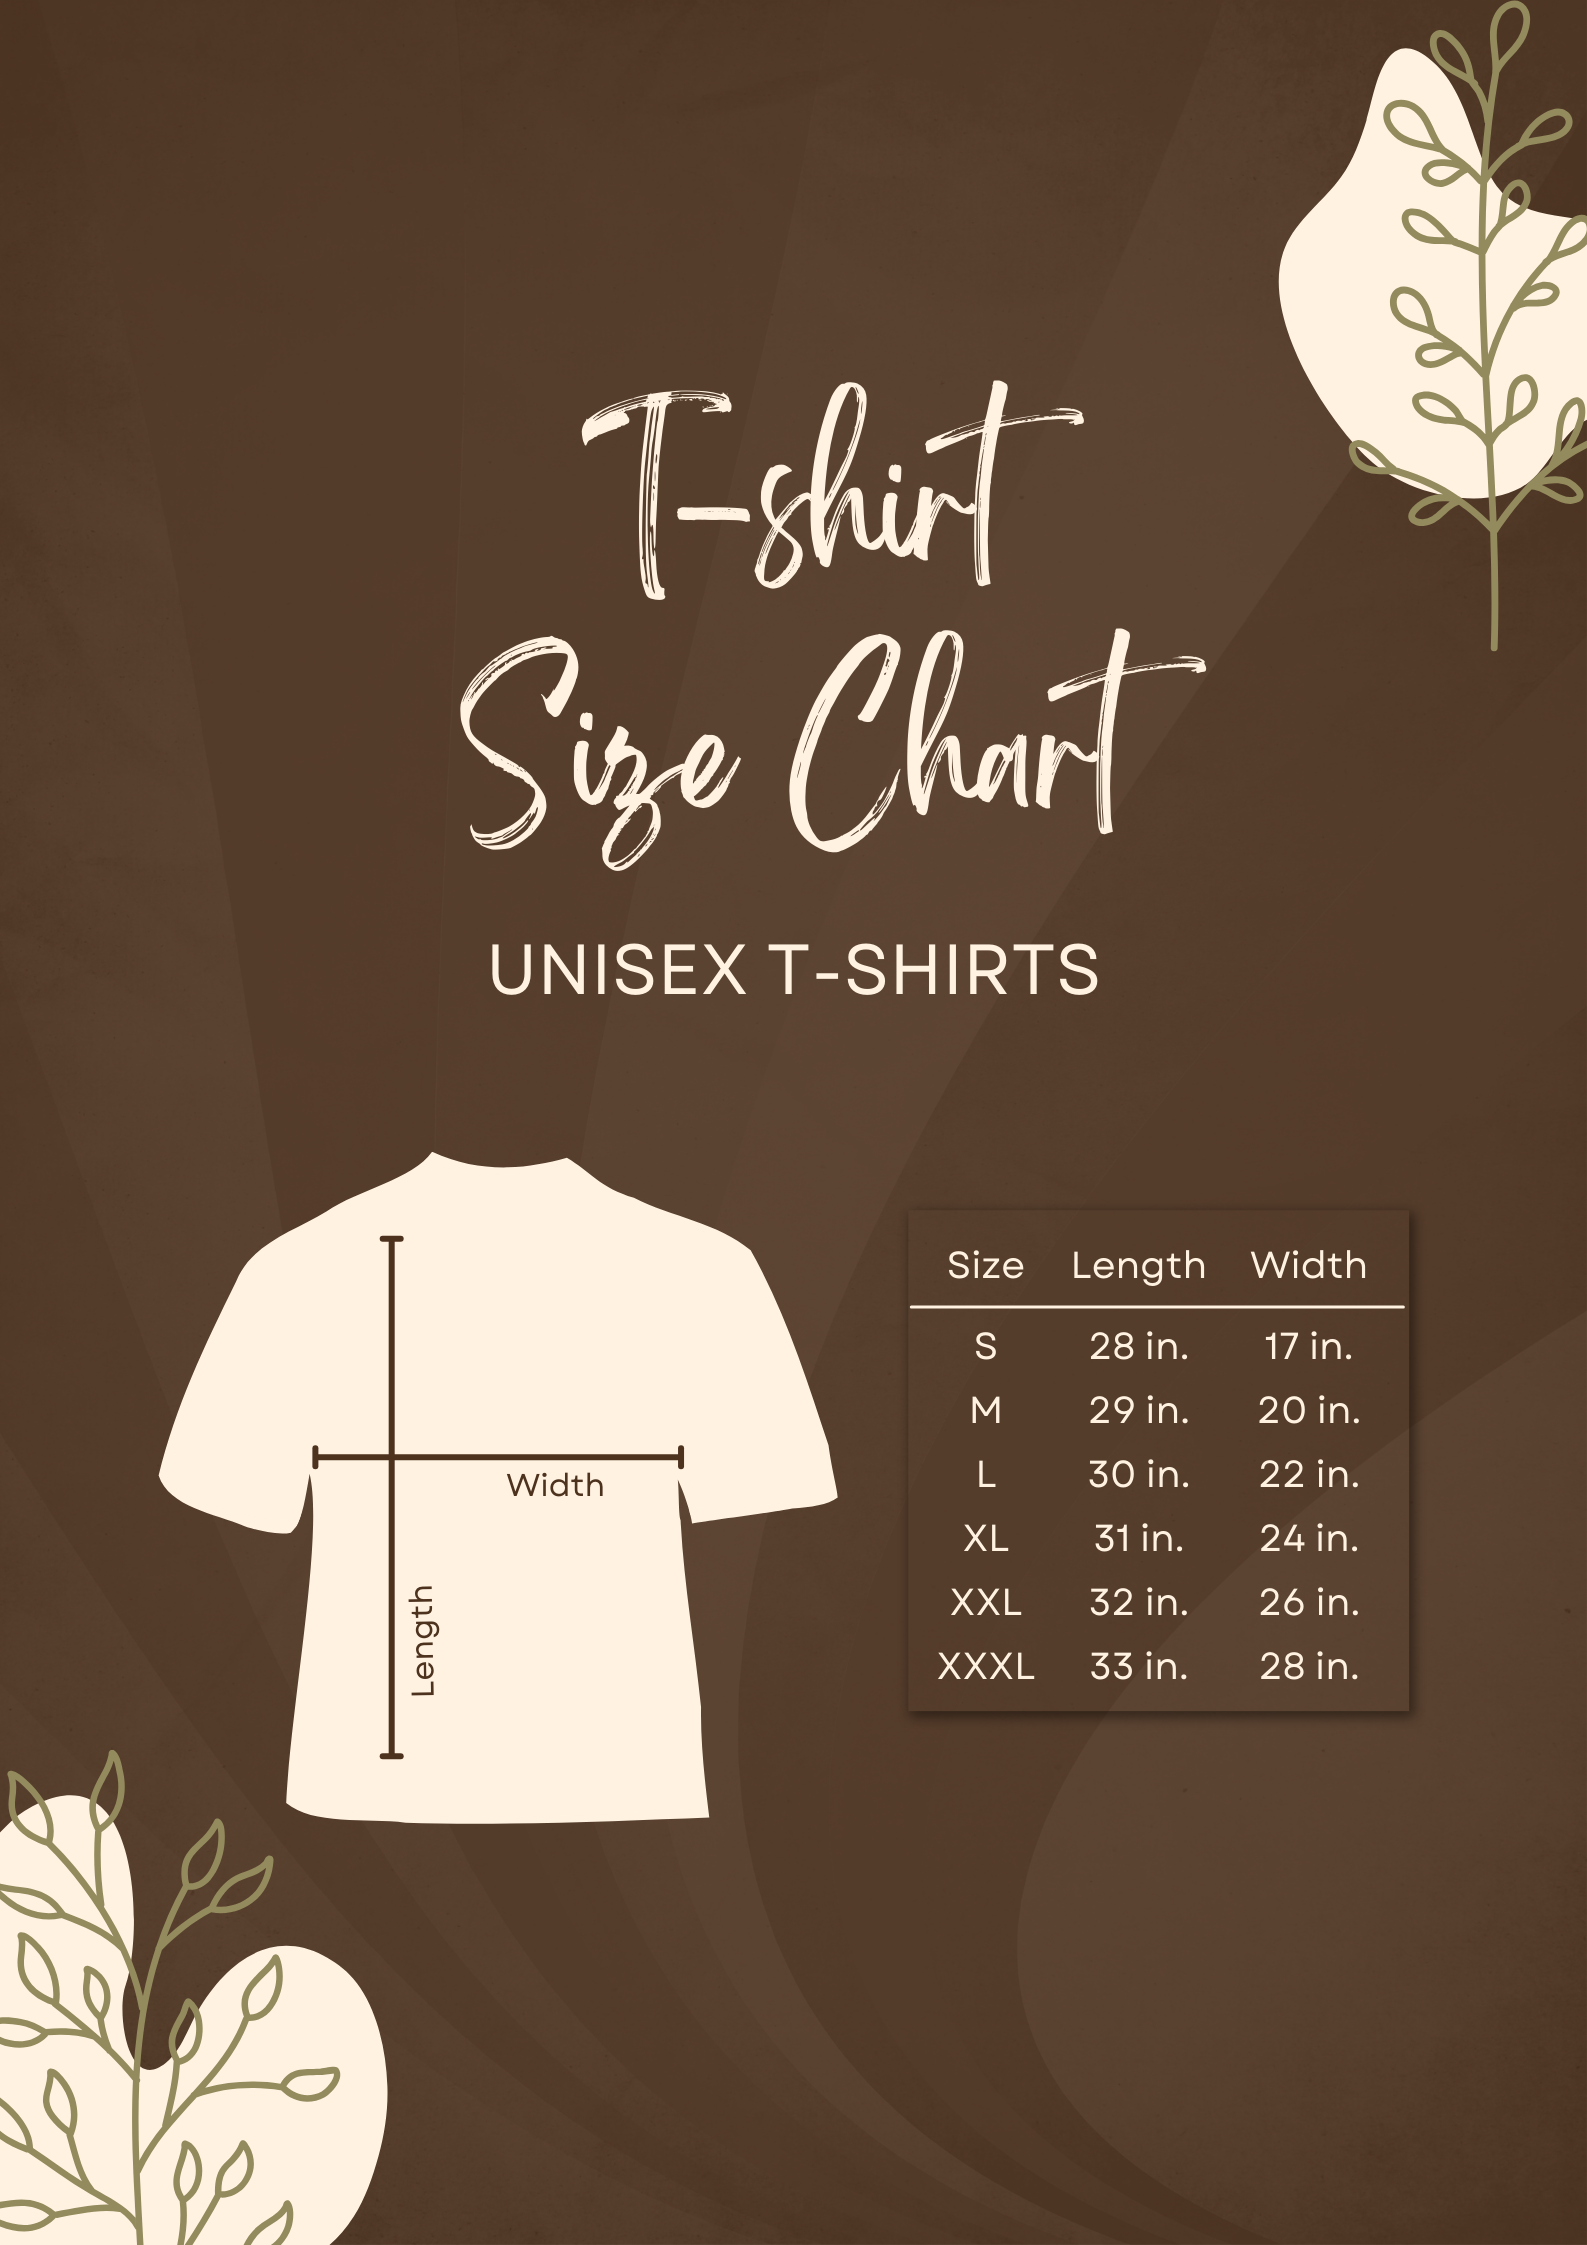 T-shirt Size Chart for Gift giving